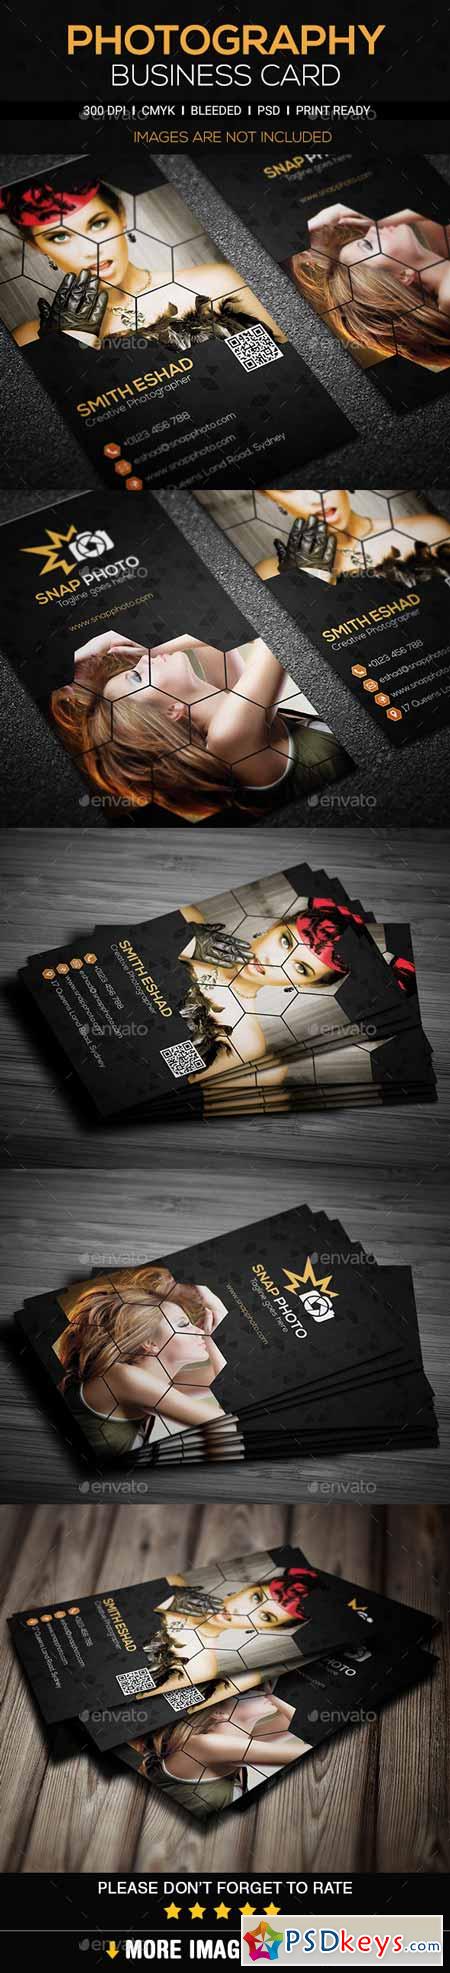 Photography Business Card 11293992